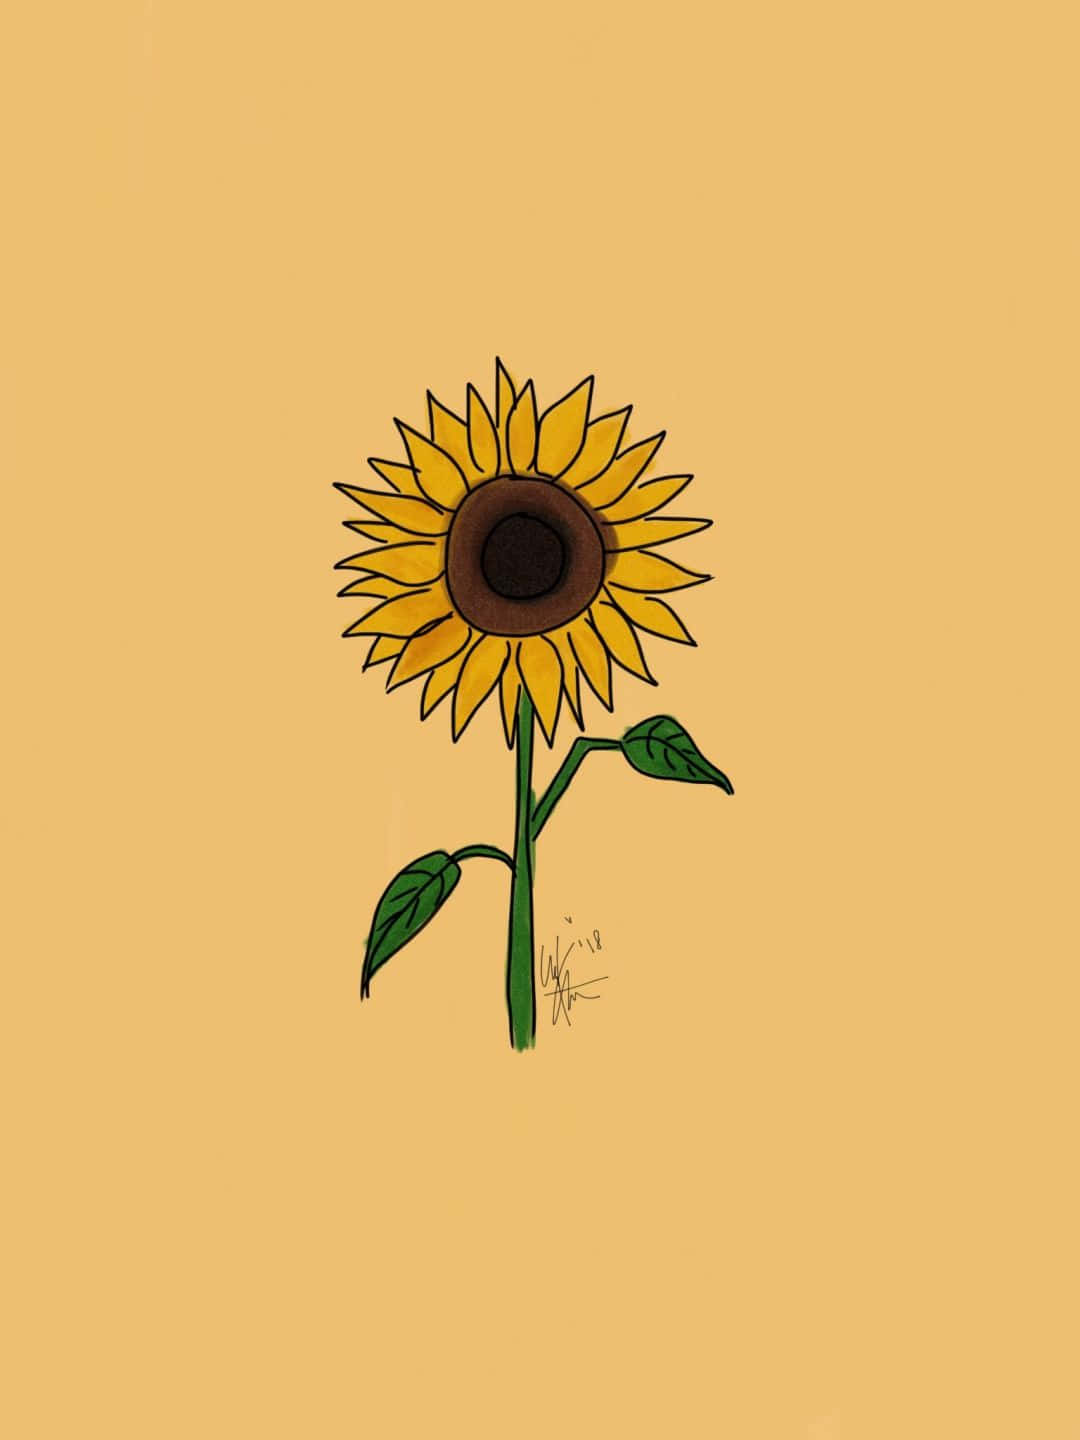 Brighten up your day with a beautiful yellow sunflower. Wallpaper